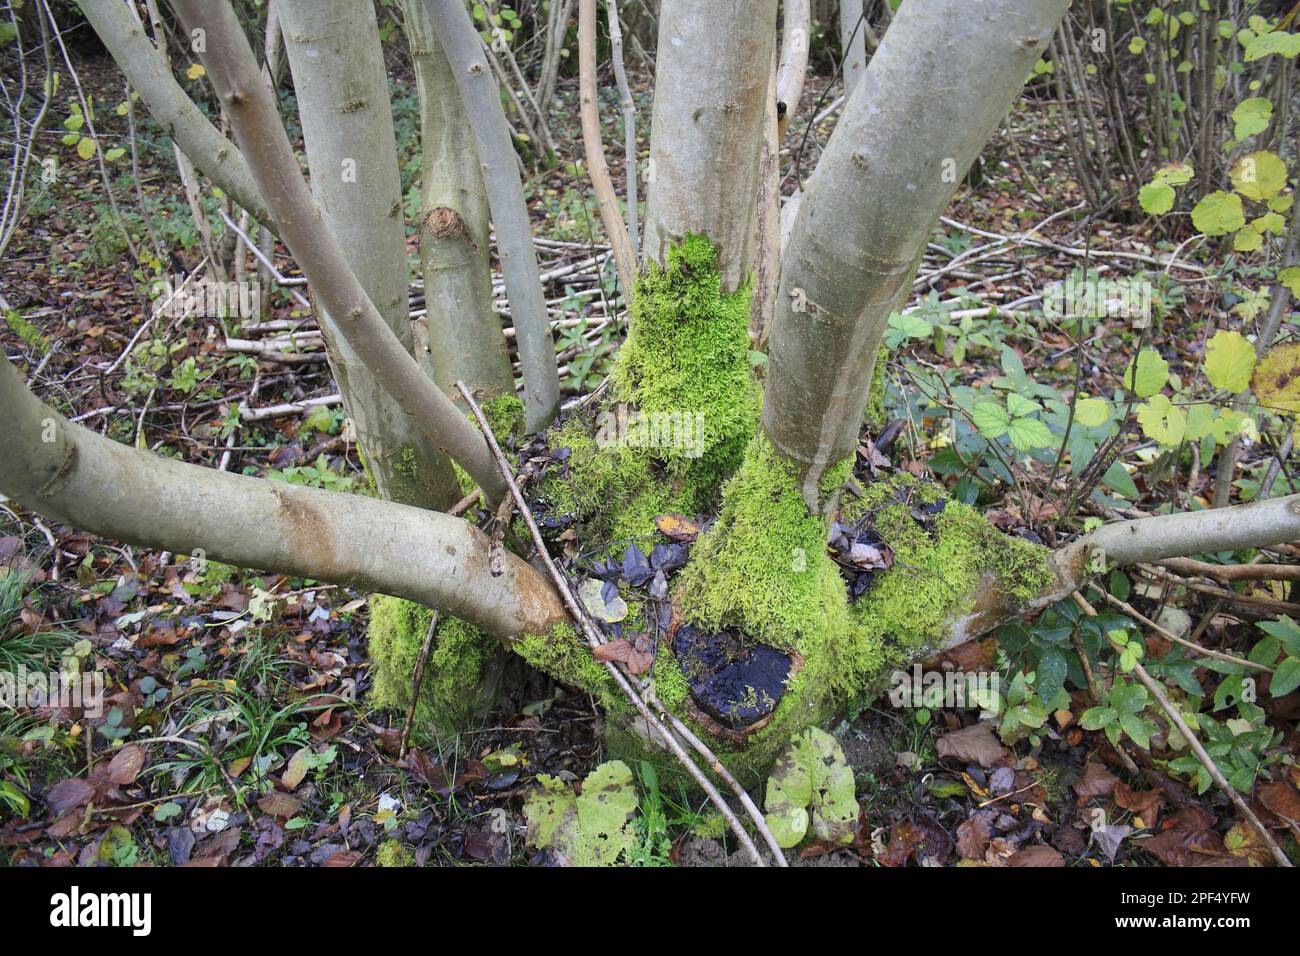 Ash, Common Ash, european ash (Fraxinus excelsior), Olive family, Common Ash coppiced stool with moss, in coppice woodland reserve, Bradfield Woods Stock Photo